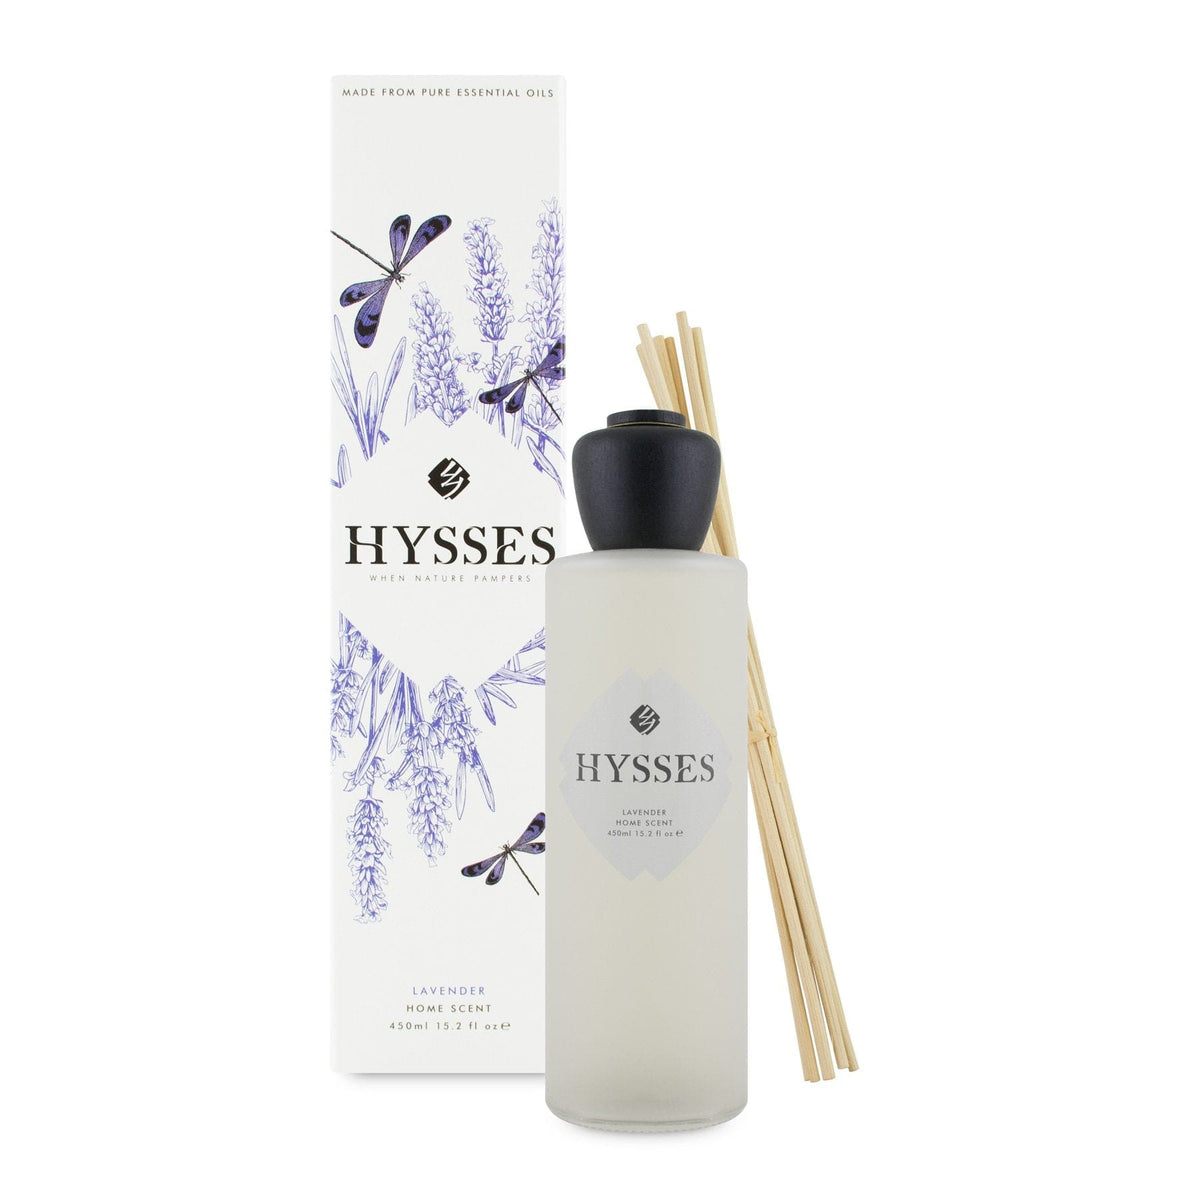 Hysses Home Scents 450ml Home Scent Reed Diffuser Lavender